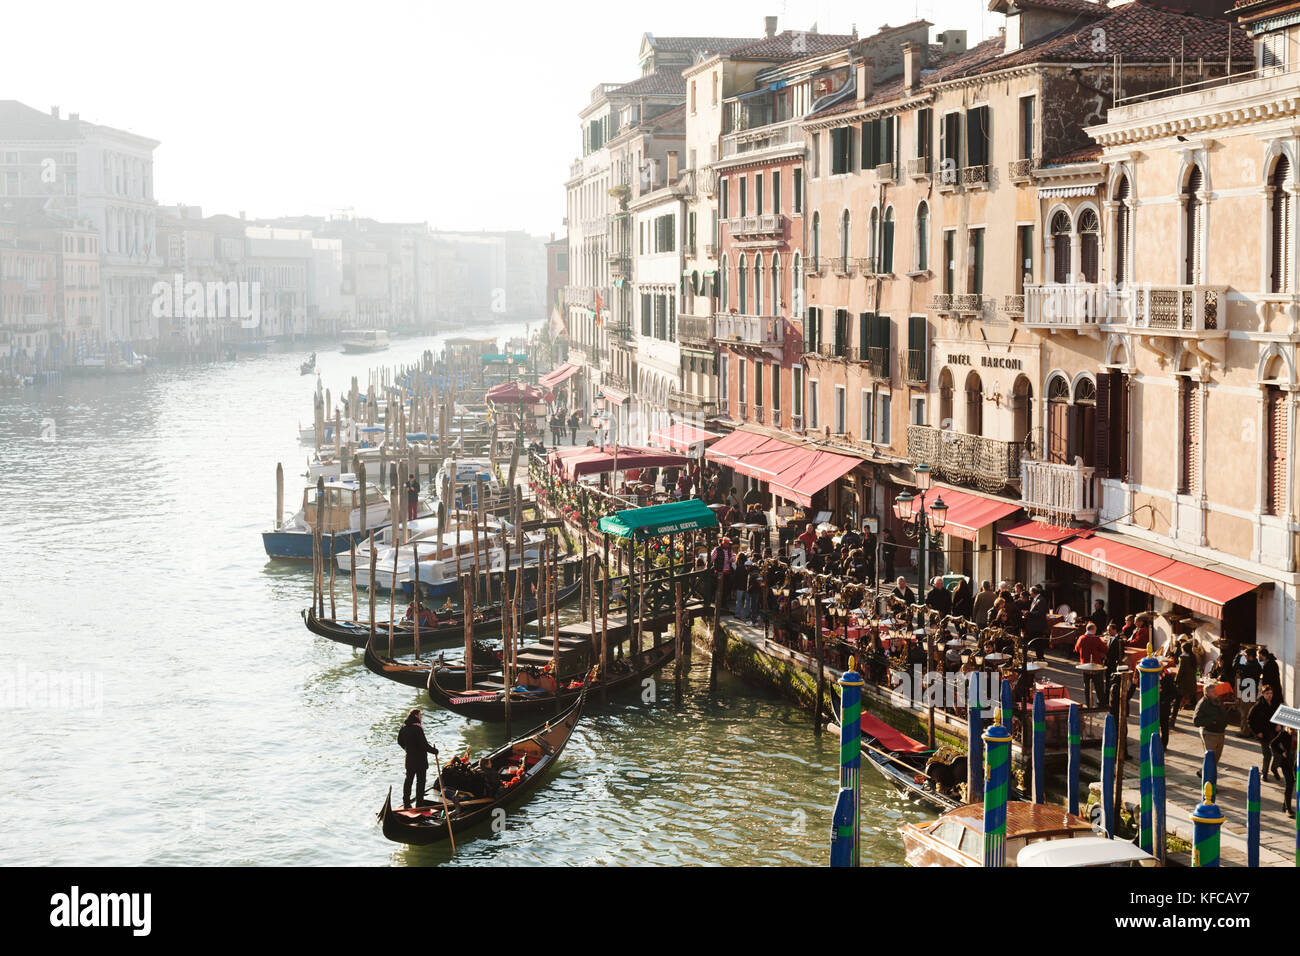 ITALY, Venice. View of the Grand Canal, homes and restaurants from the Rialto Bridge. Stock Photo